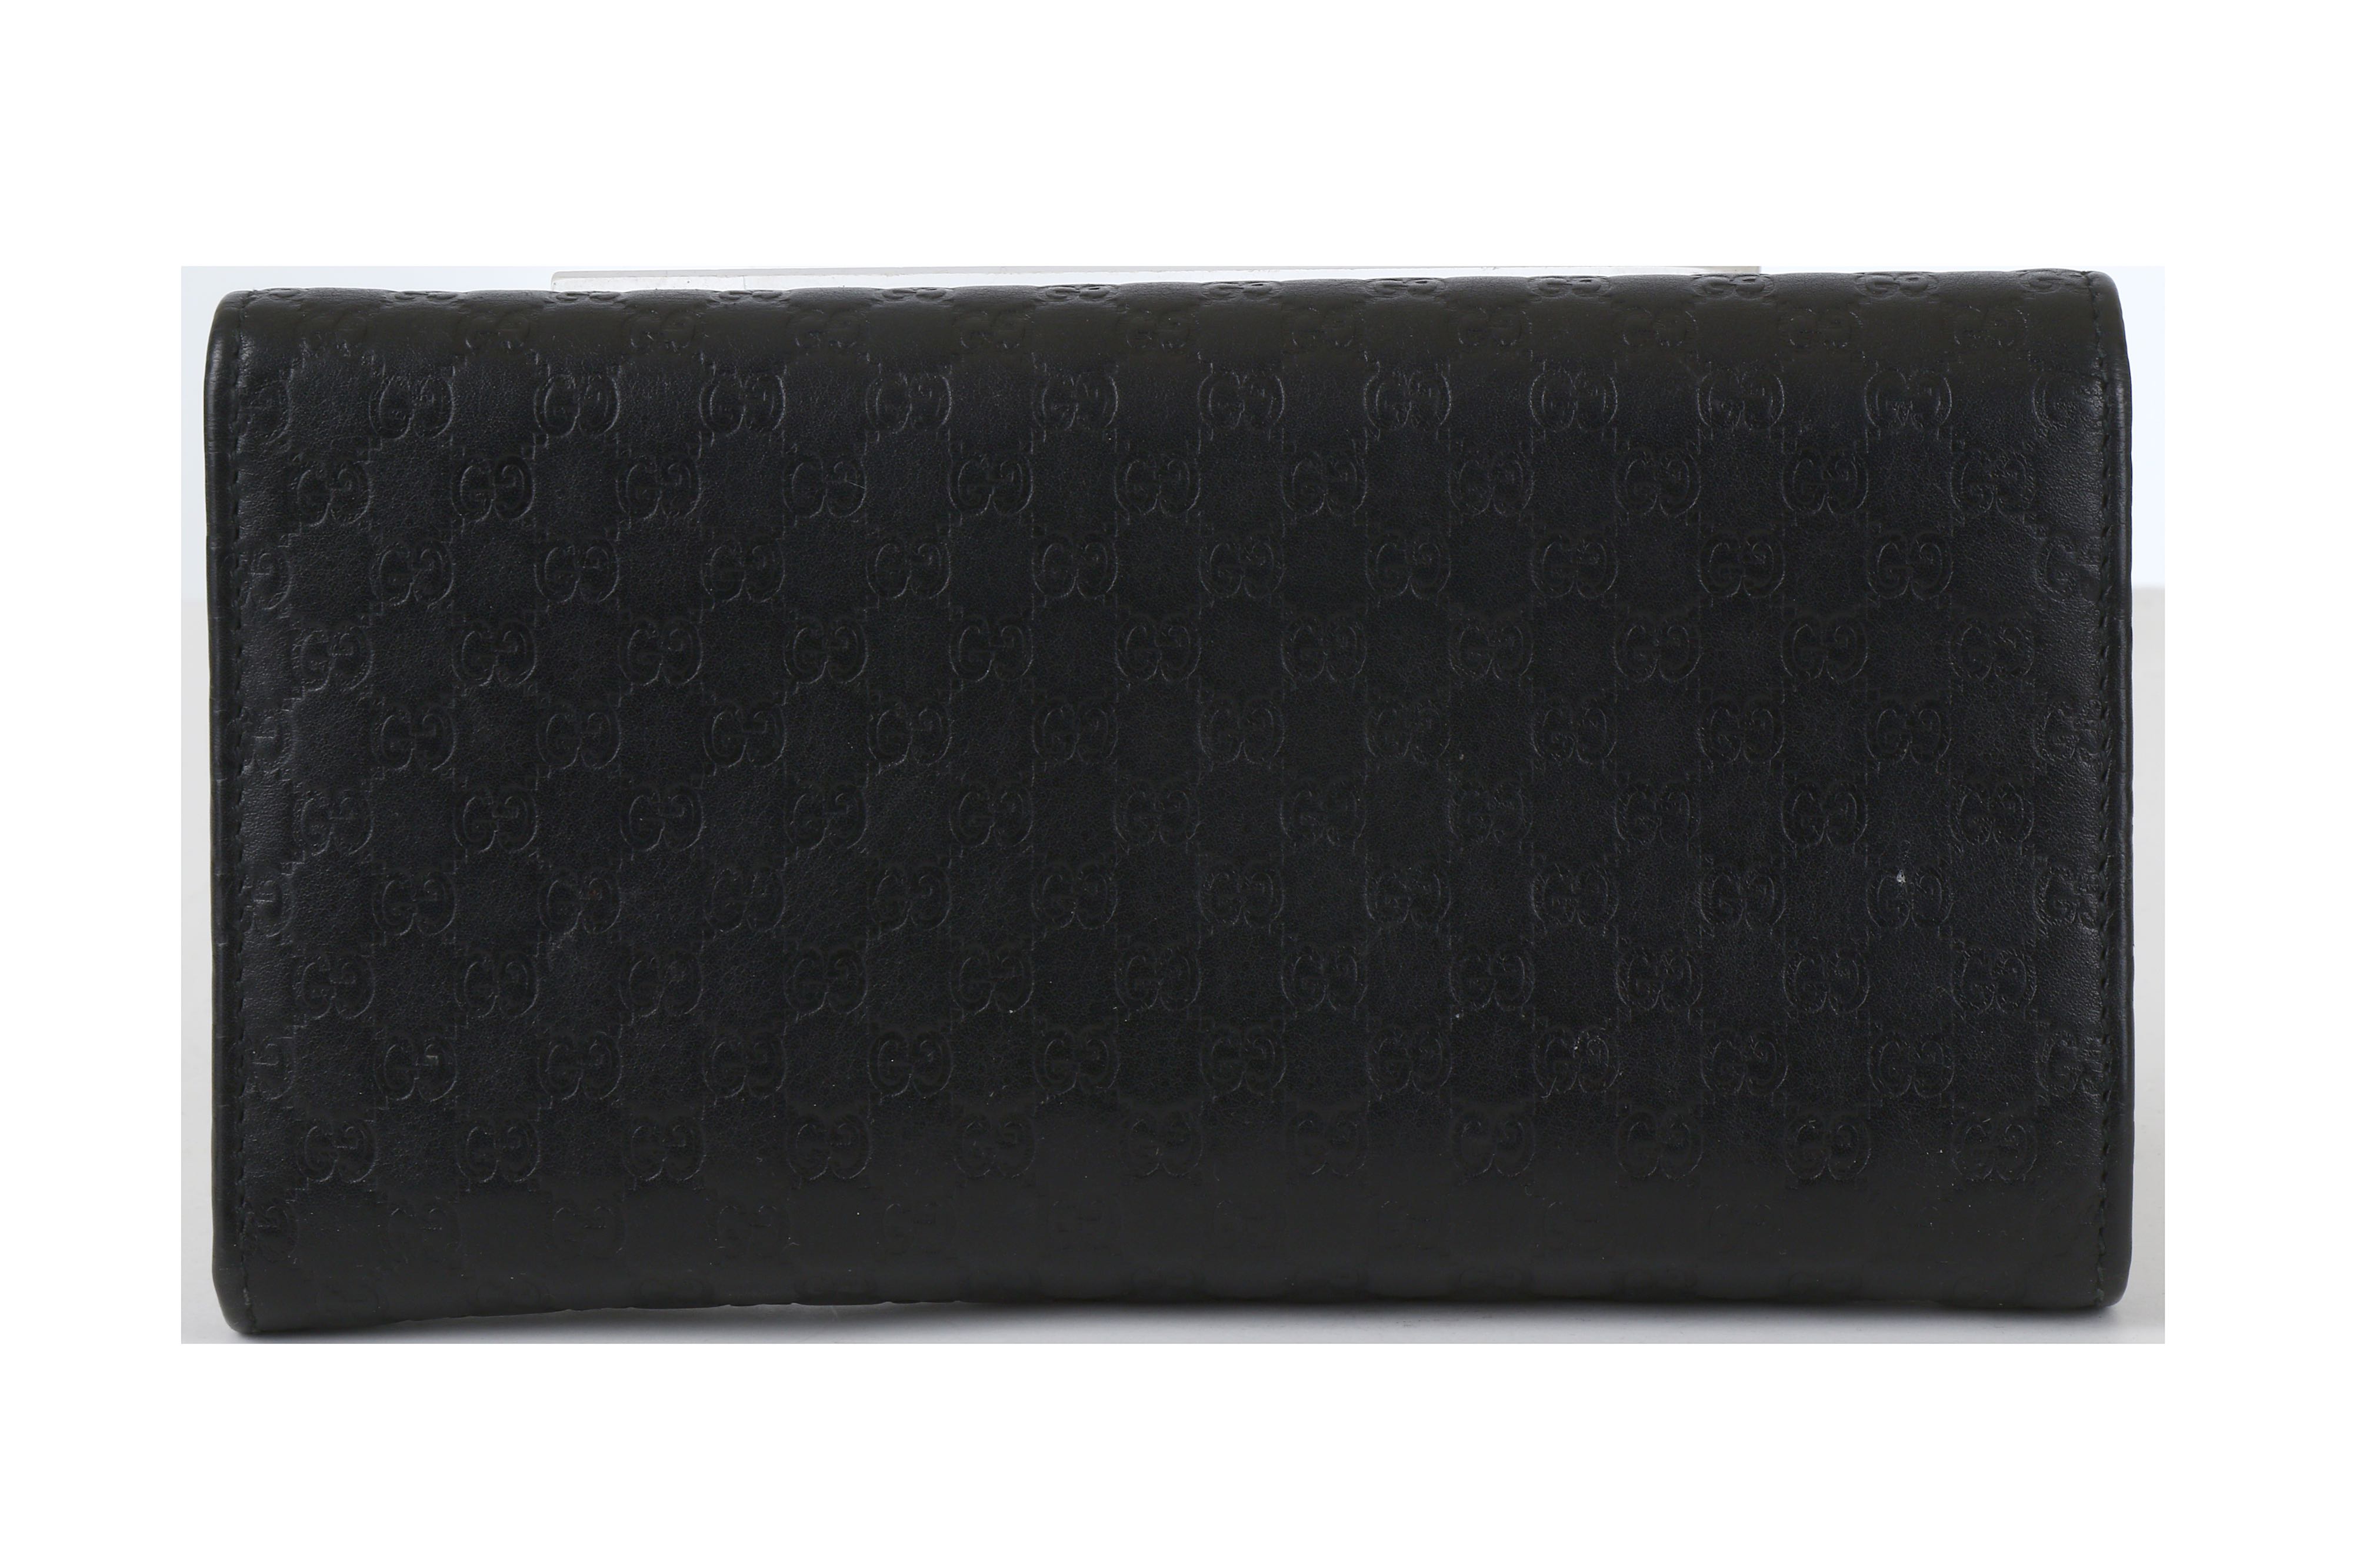 Lot 134 - Gucci Black Guccissima Wallet, embossed logo